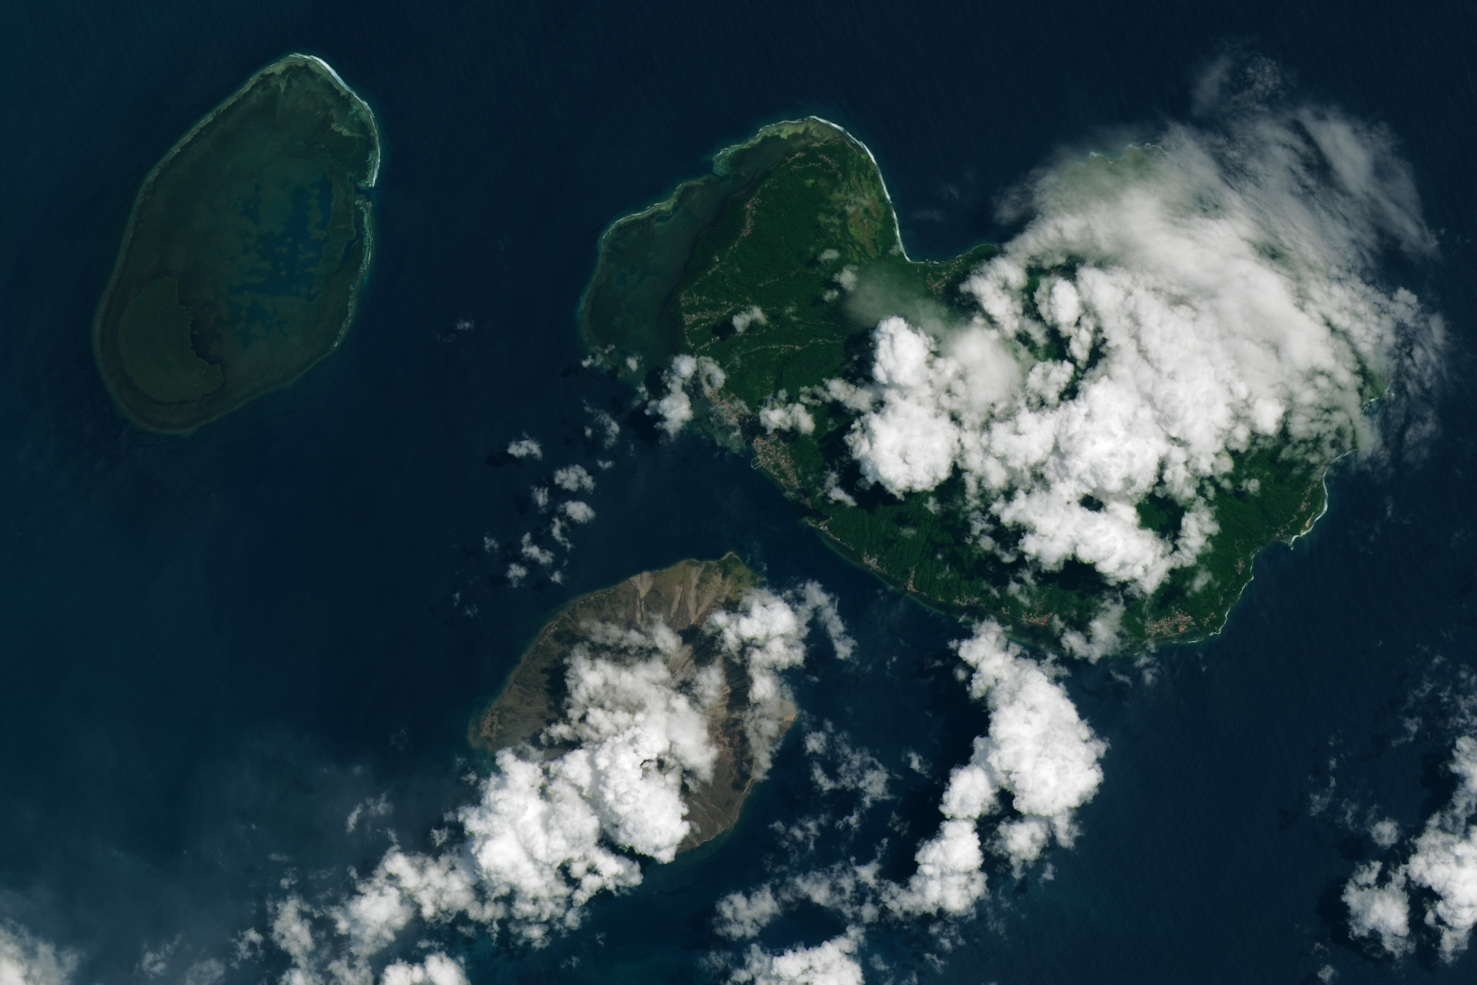 Ruang Island centers, it is brown in color above to the both right and left are other islands that are a vibrant green color. large white cumulus clouds span the image top right down past ruang to the bottom left.